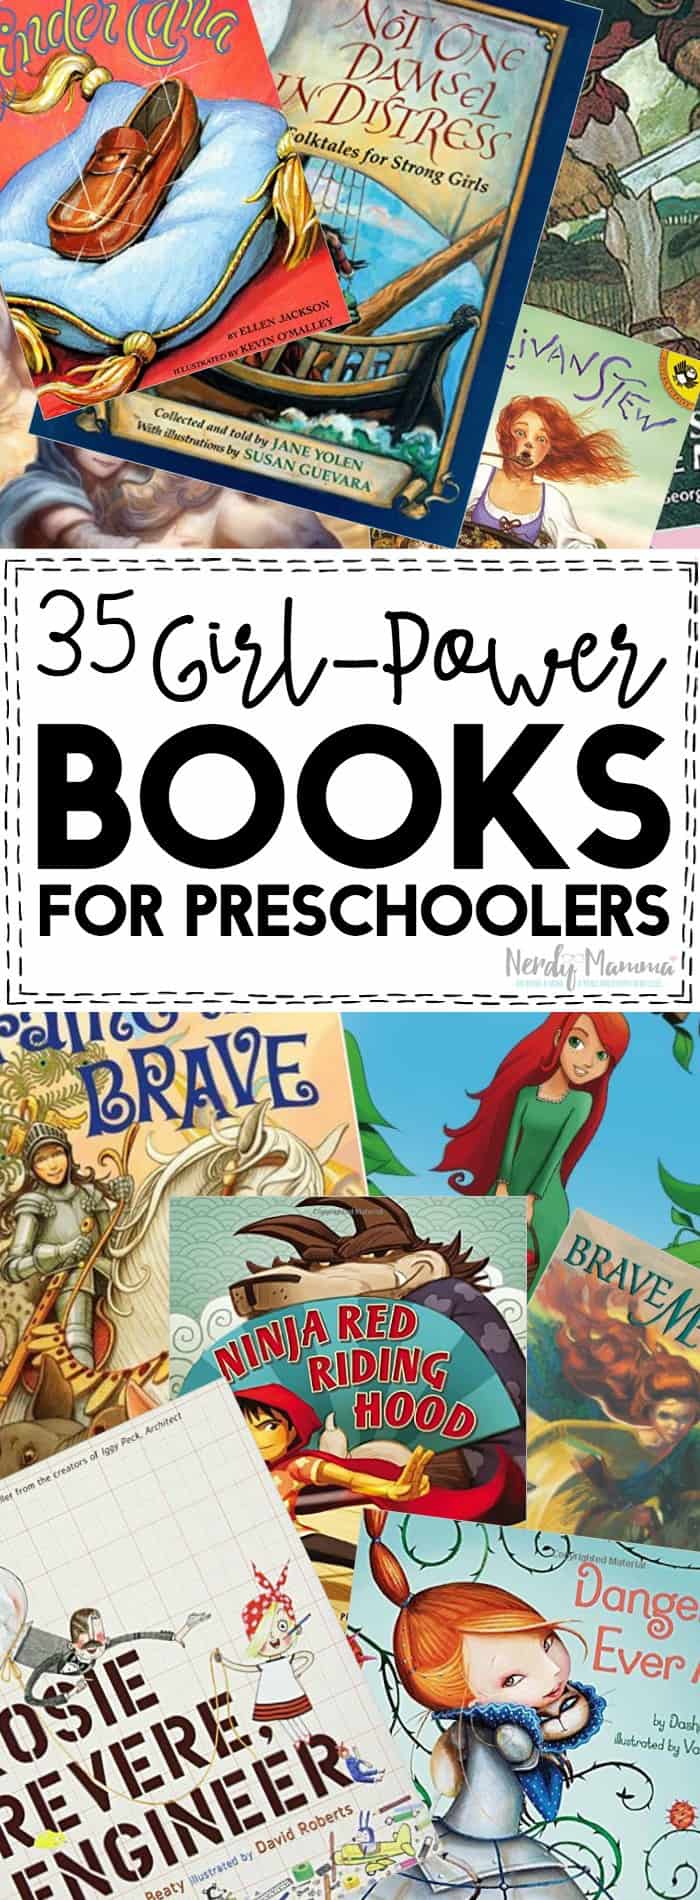 I absolutely LOVE these 35 Girl-Power Books for preschoolers and toddlers! What an awesome way to teach our girls!